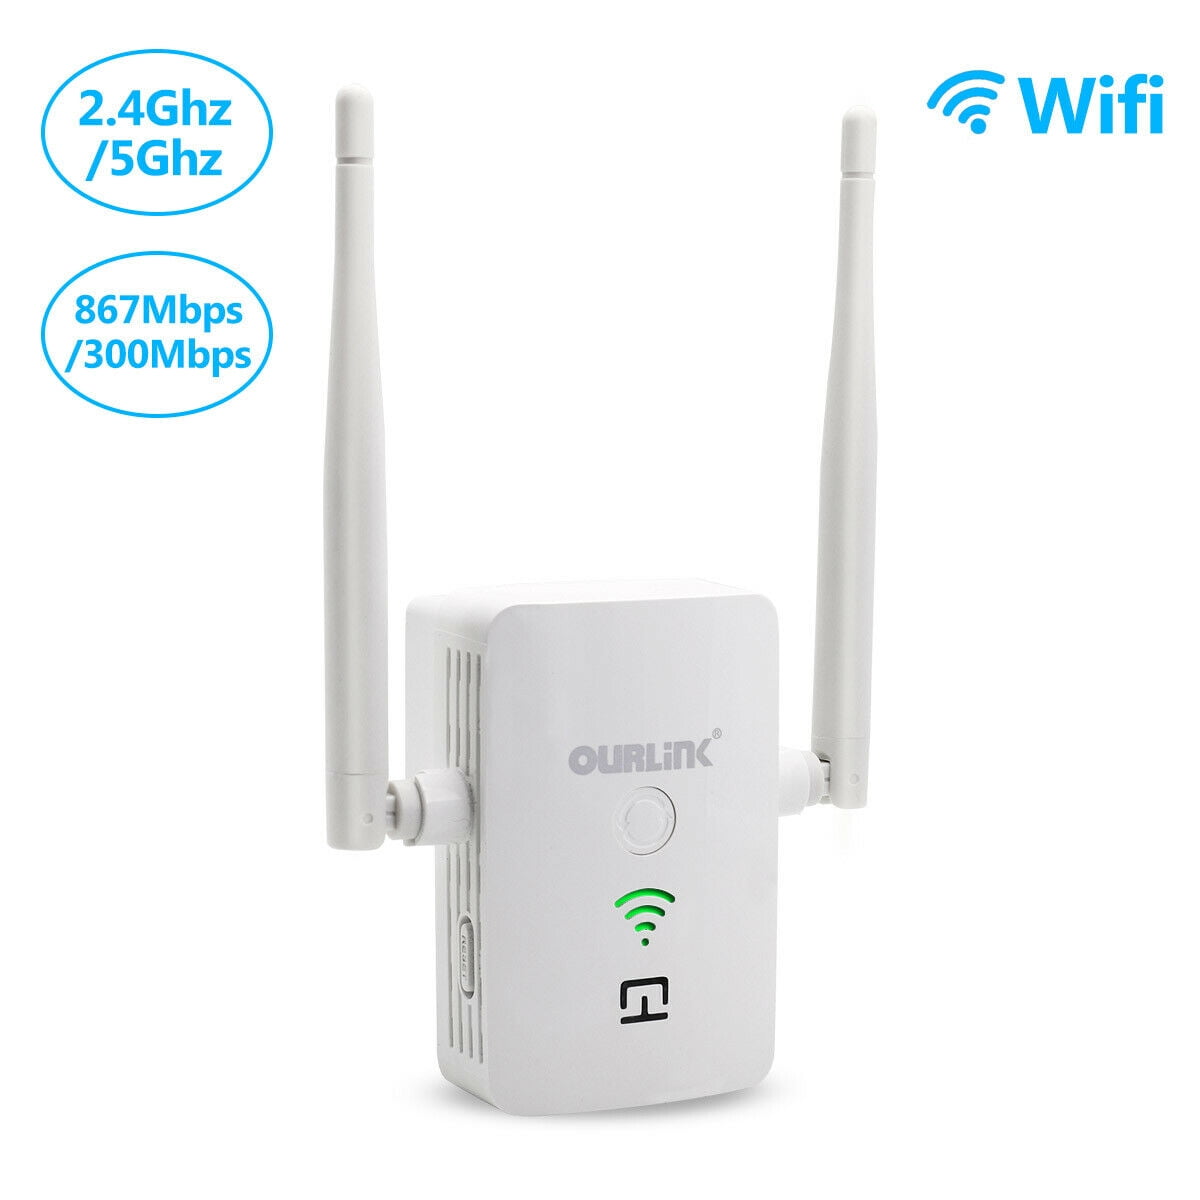 Black Black WiFi Extender,JOOWIN 1200Mbps WiFi Range Extender WiFi Signal Booster for Home WiFi Repeater-2.4 & 5GHz Dual Band Coverage Up to 2500sq.ft Internet Wireless Signal Booster